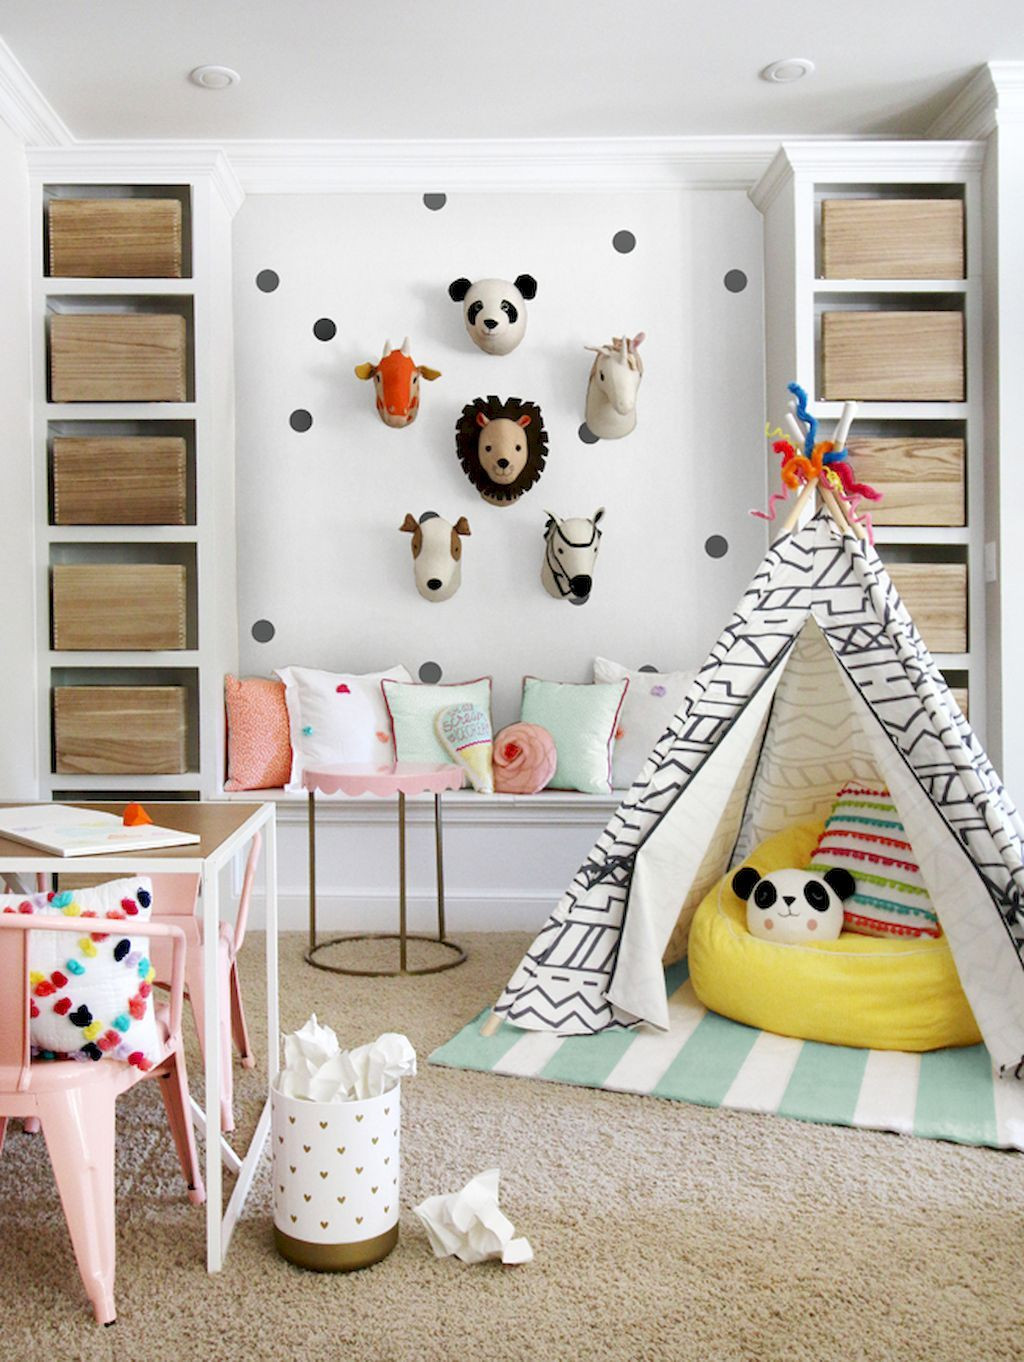 DIY Kids Playrooms
 Diy playroom for kids decorating ideas 48 With images